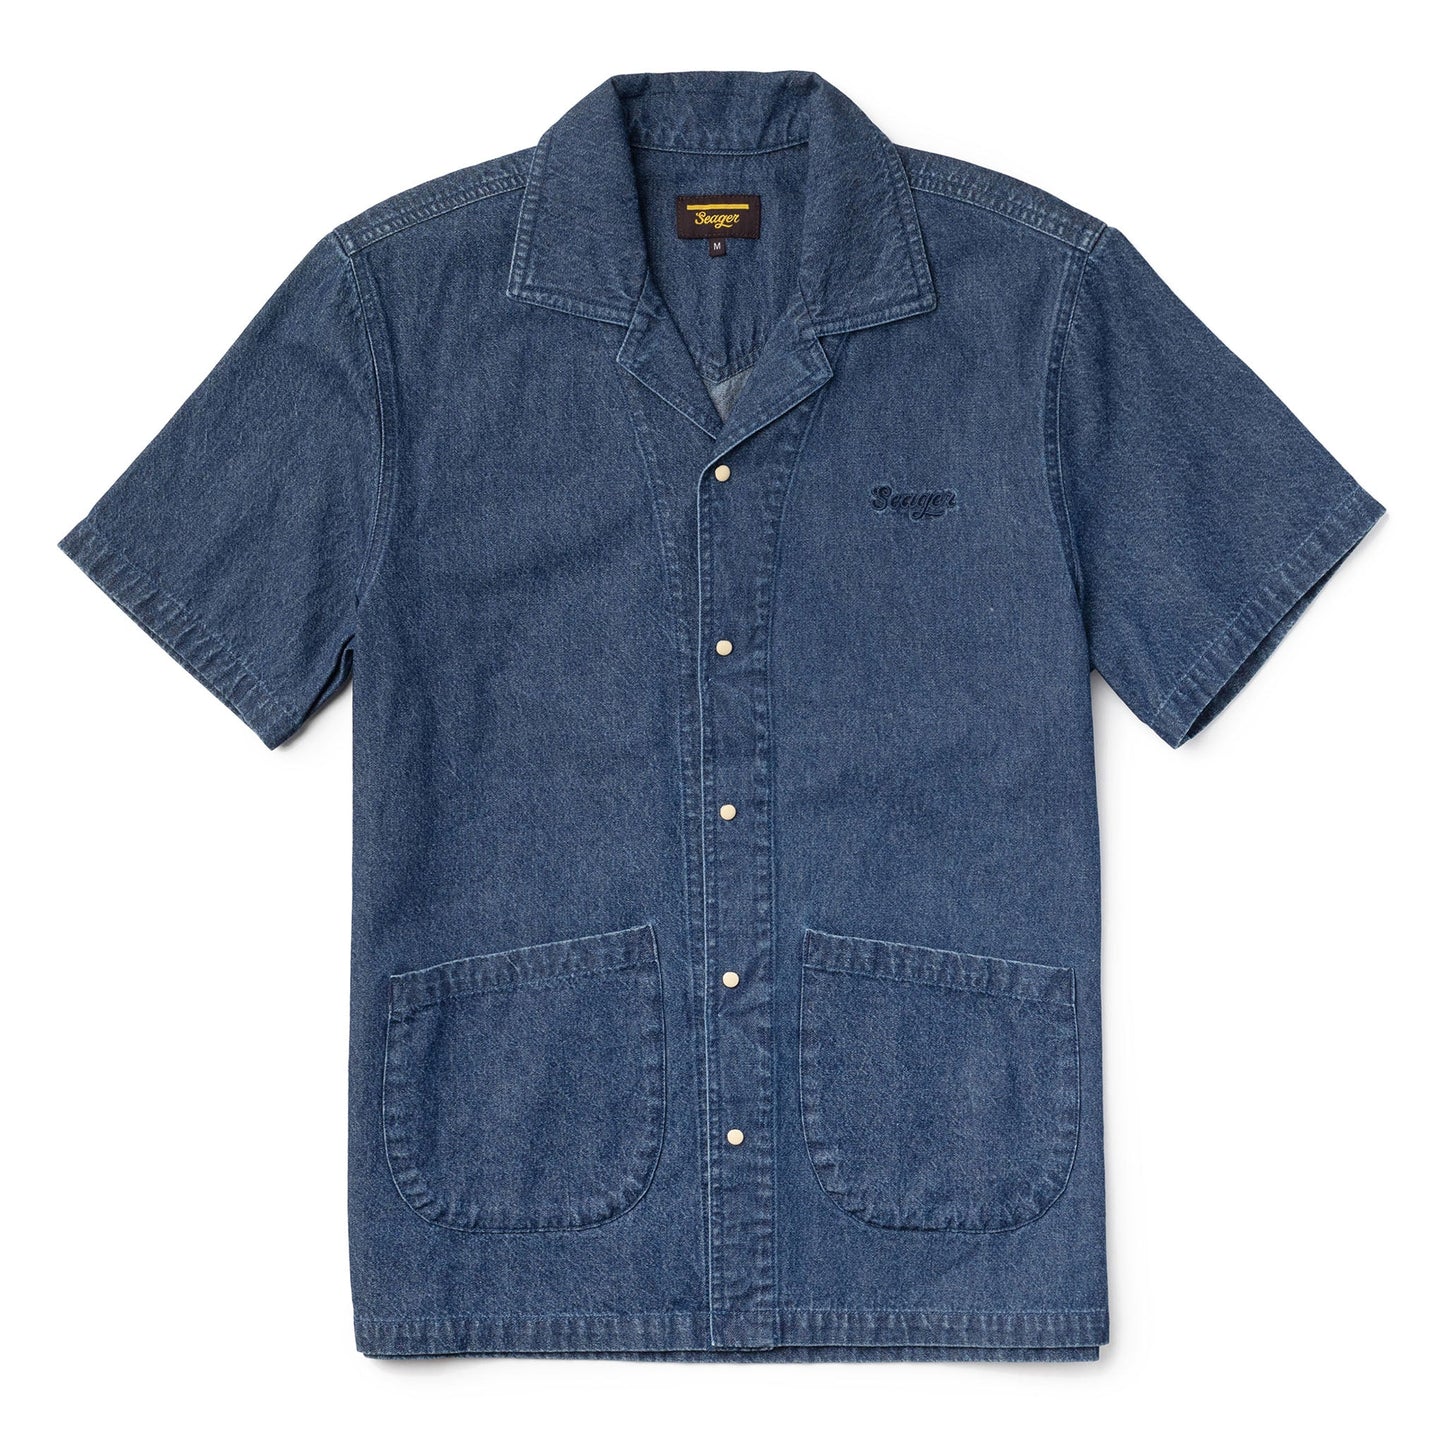 Seager's Southpaw Whippersnapper Shirt in the color Indigo